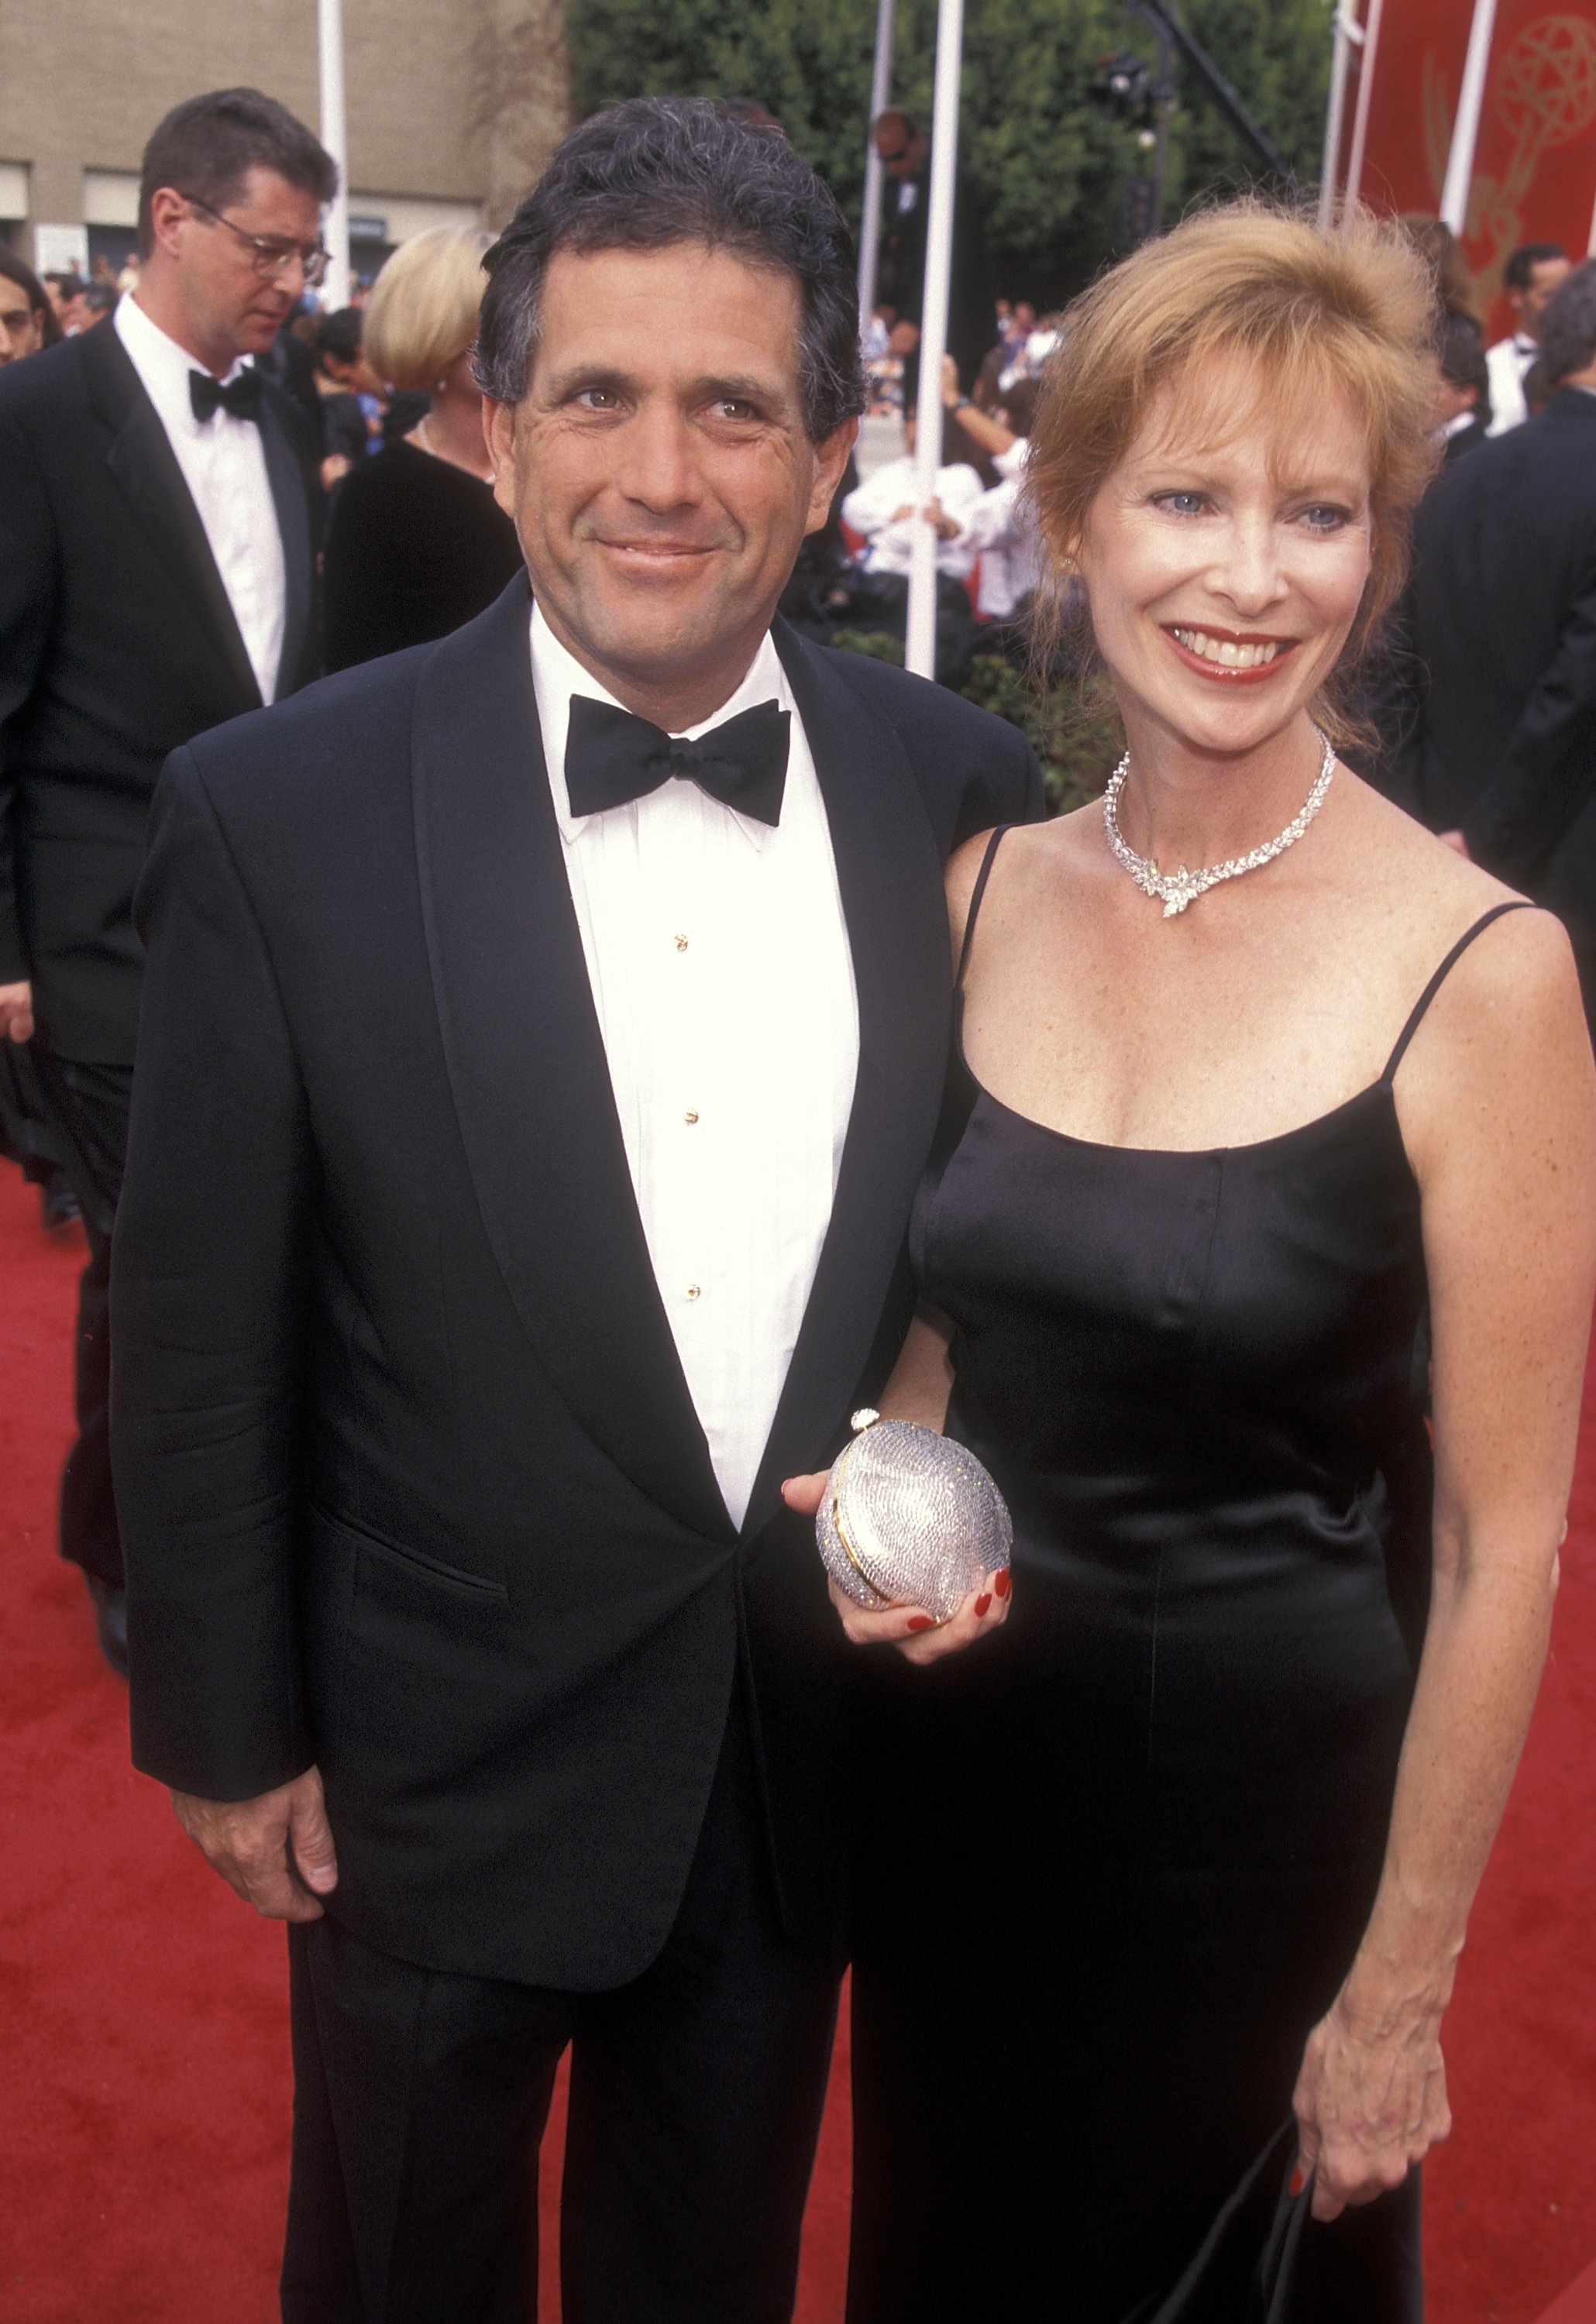 Leslie Moonves and Nancy Wiesenfeld attend the 49th Annual Primetime Emmy Awards on September 14, 1997, in Pasadena, California | Source: Getty Images